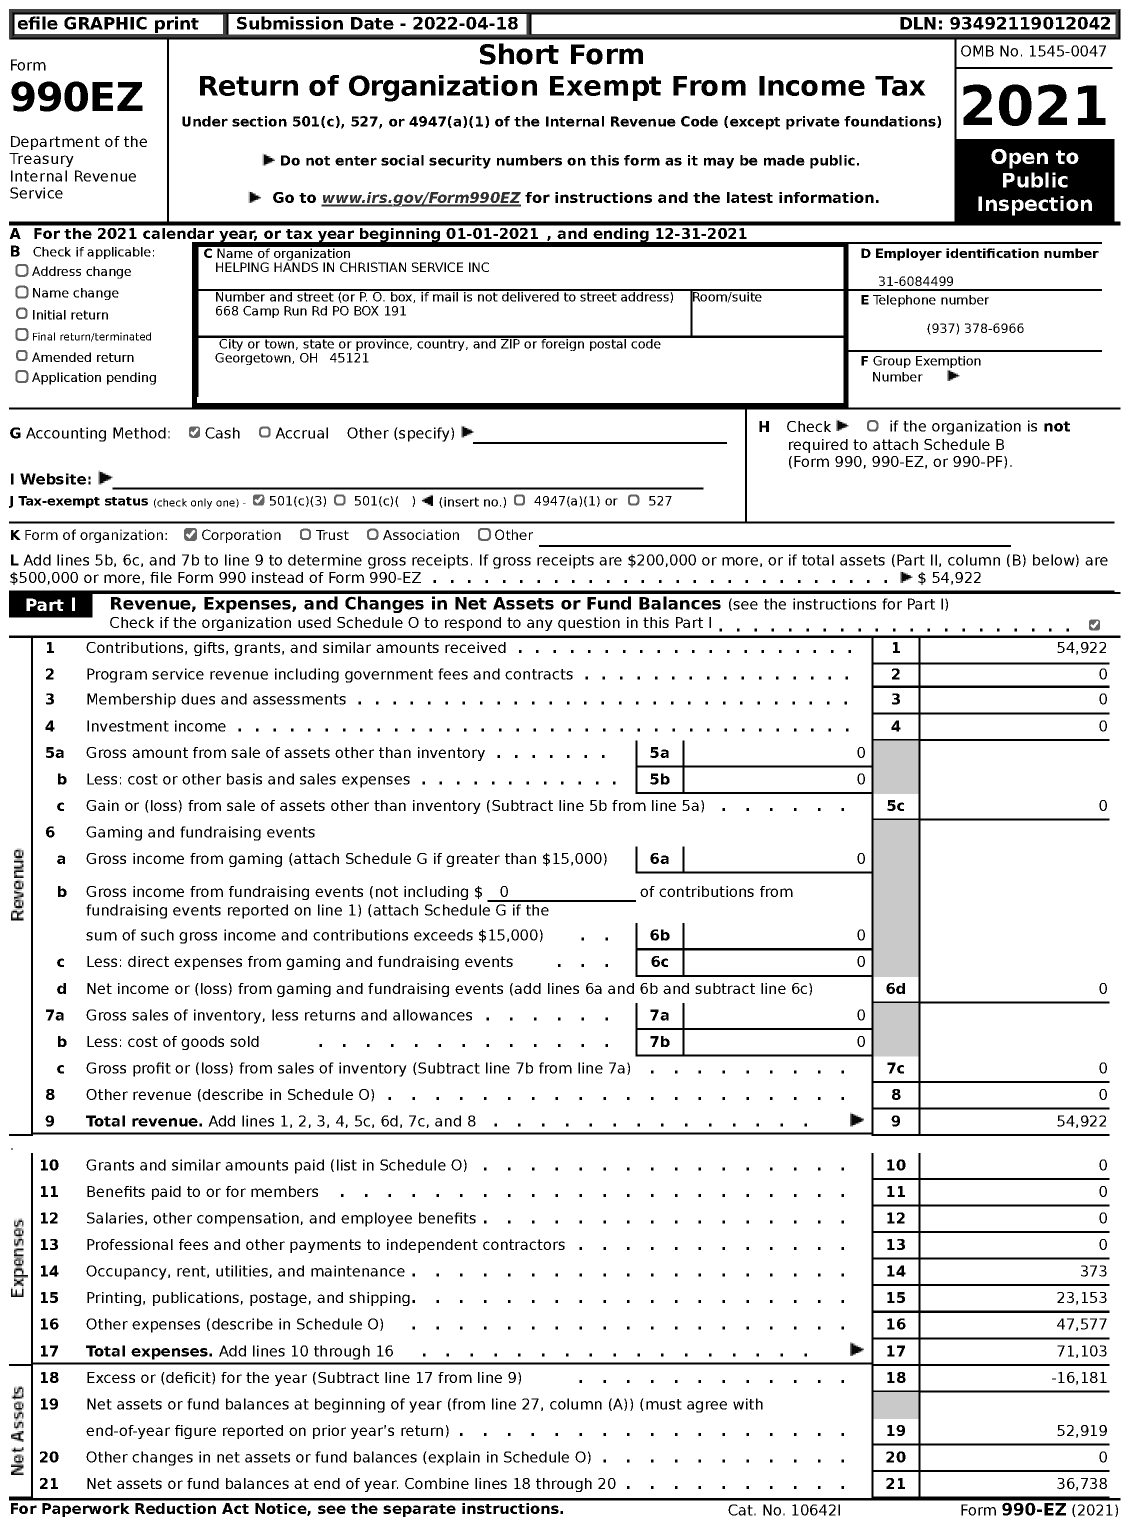 Image of first page of 2021 Form 990EZ for Helping Hands in Christian Services